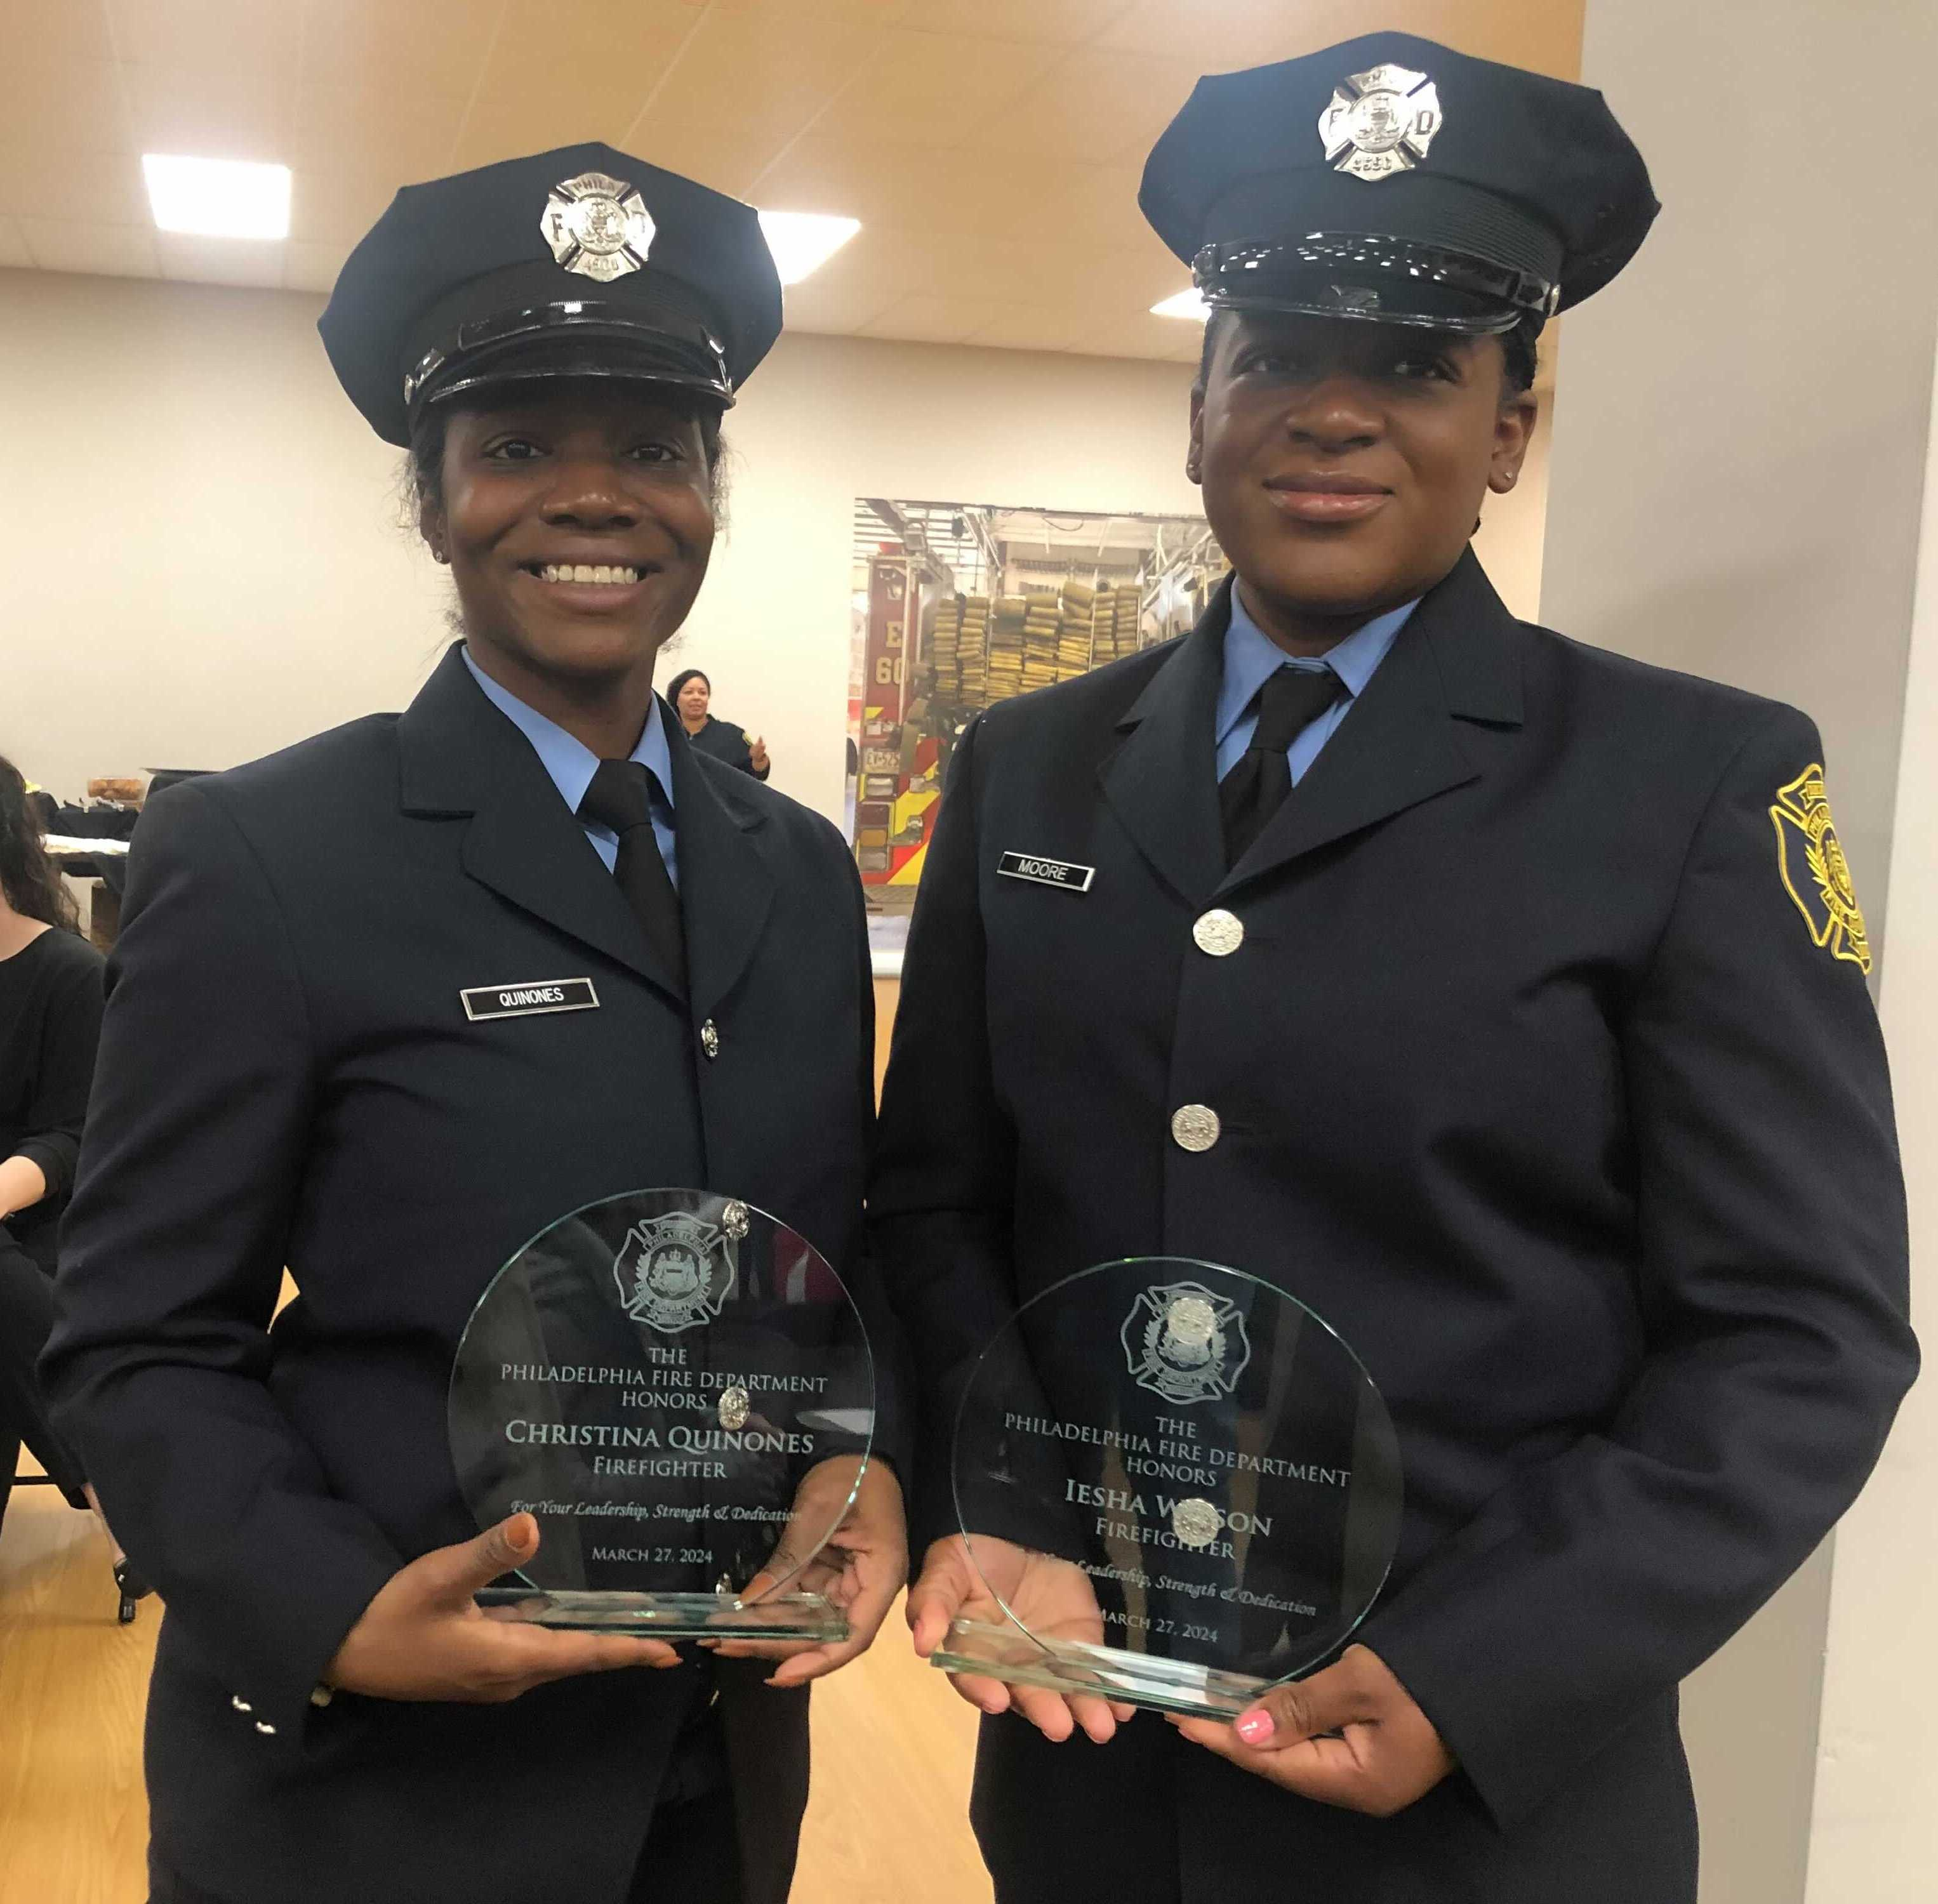 Women in Philadelphia Fire Department recognized at All Hearts in Service ceremony